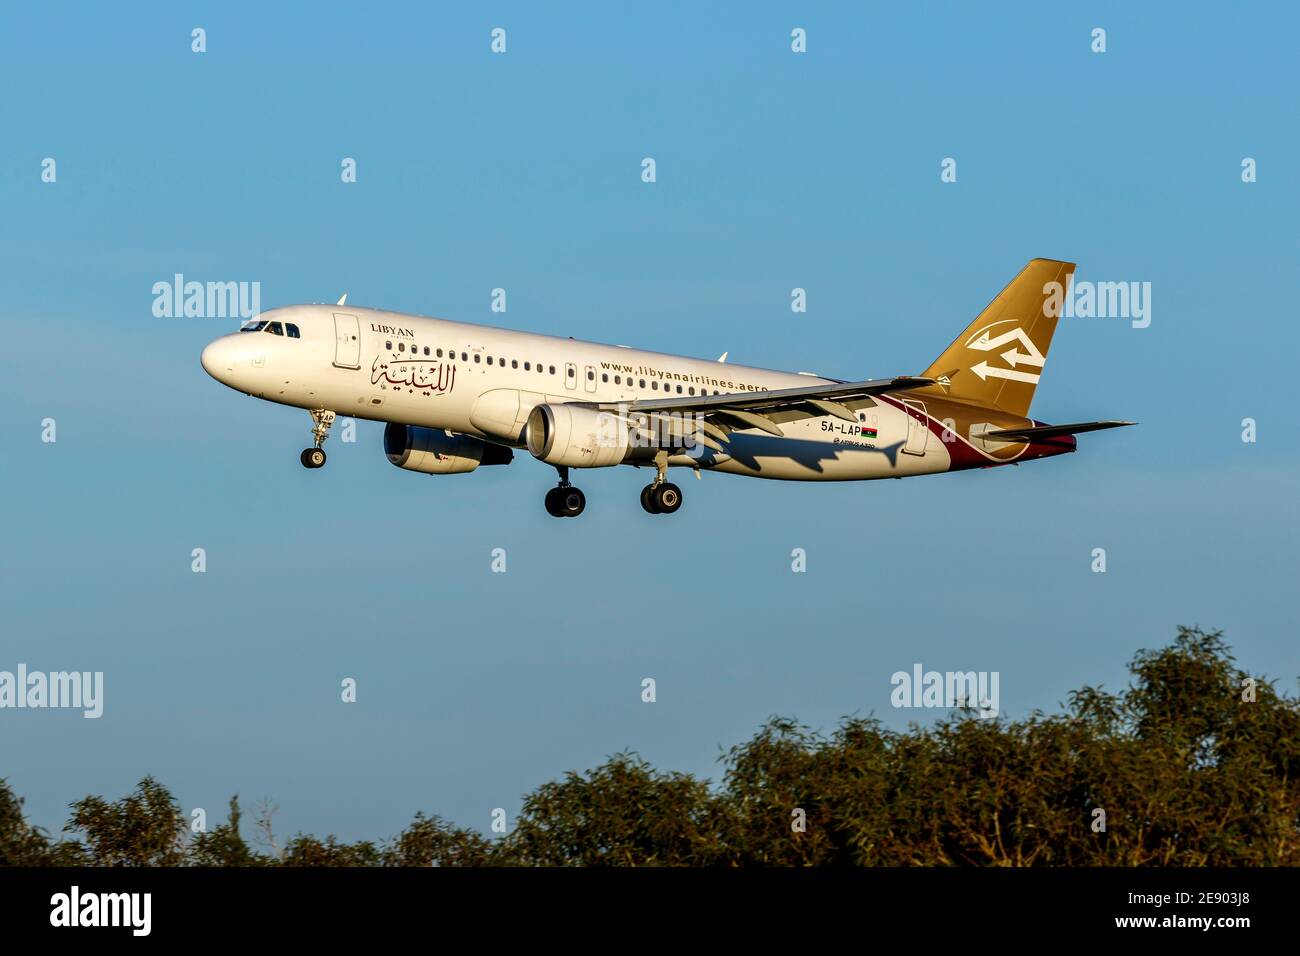 Libyan Airlines Airbus A320-214 (Reg: 5A-LAP) arriving in the late evening from Tripoli, Libya. Stock Photo